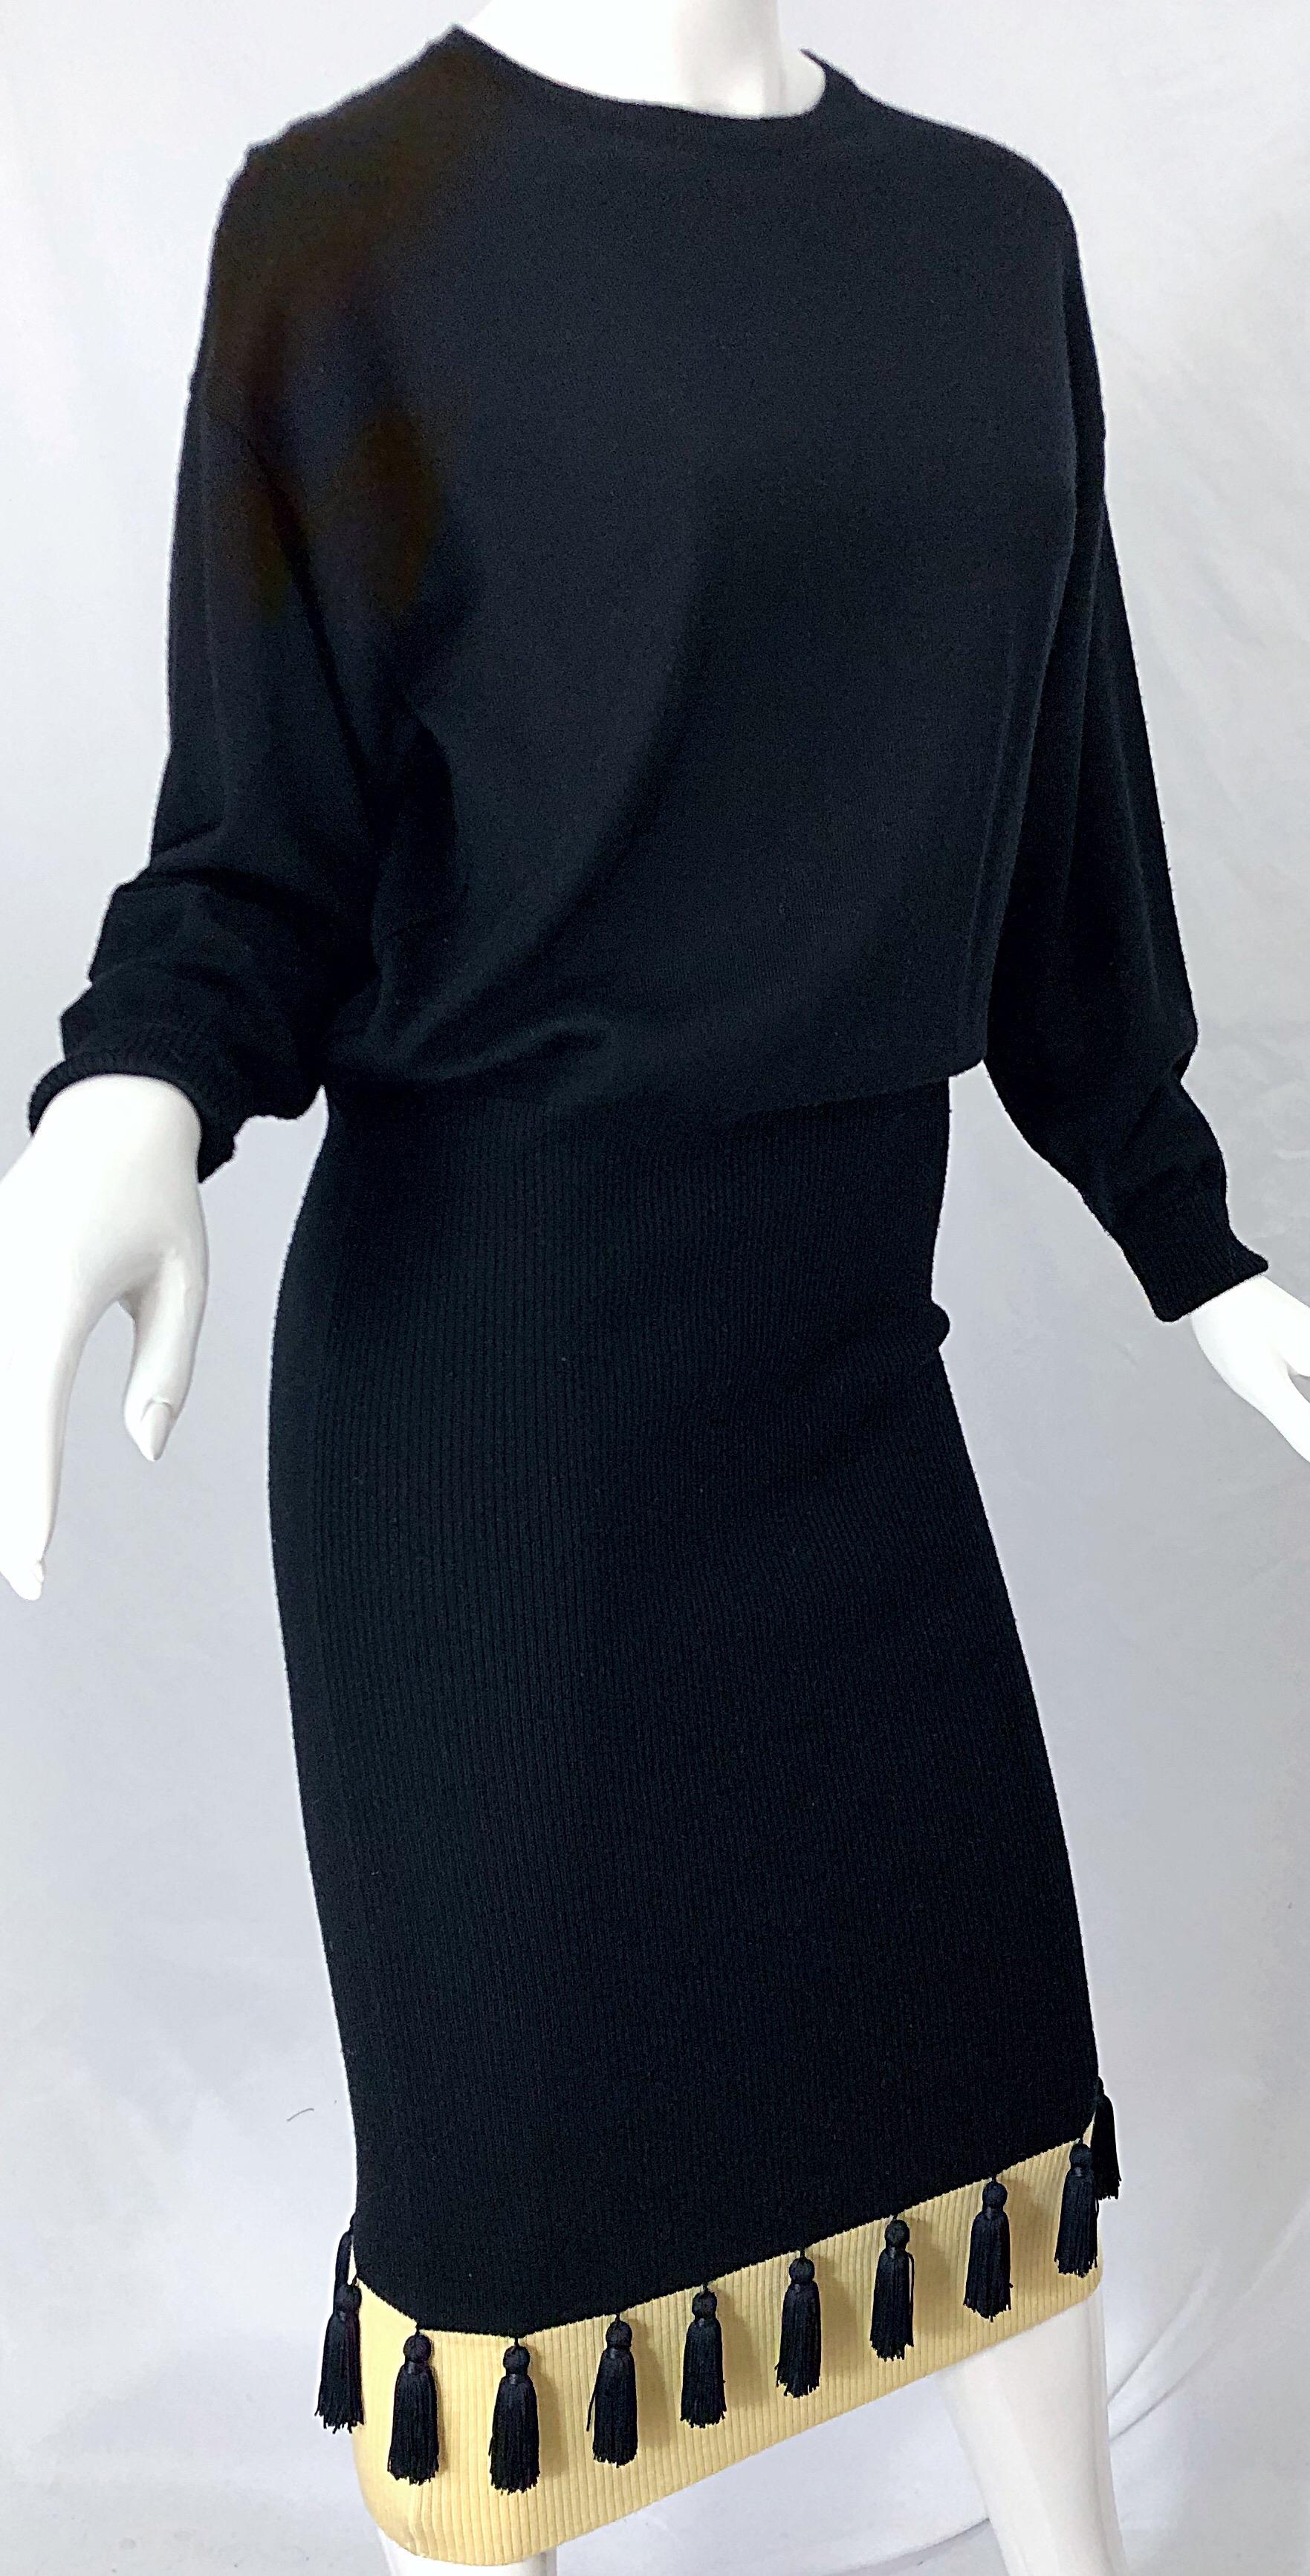 1980s Angelo Tarlazzi Black and Ivory Wool Dolman Sleeve 80s Sweater Dress For Sale 1